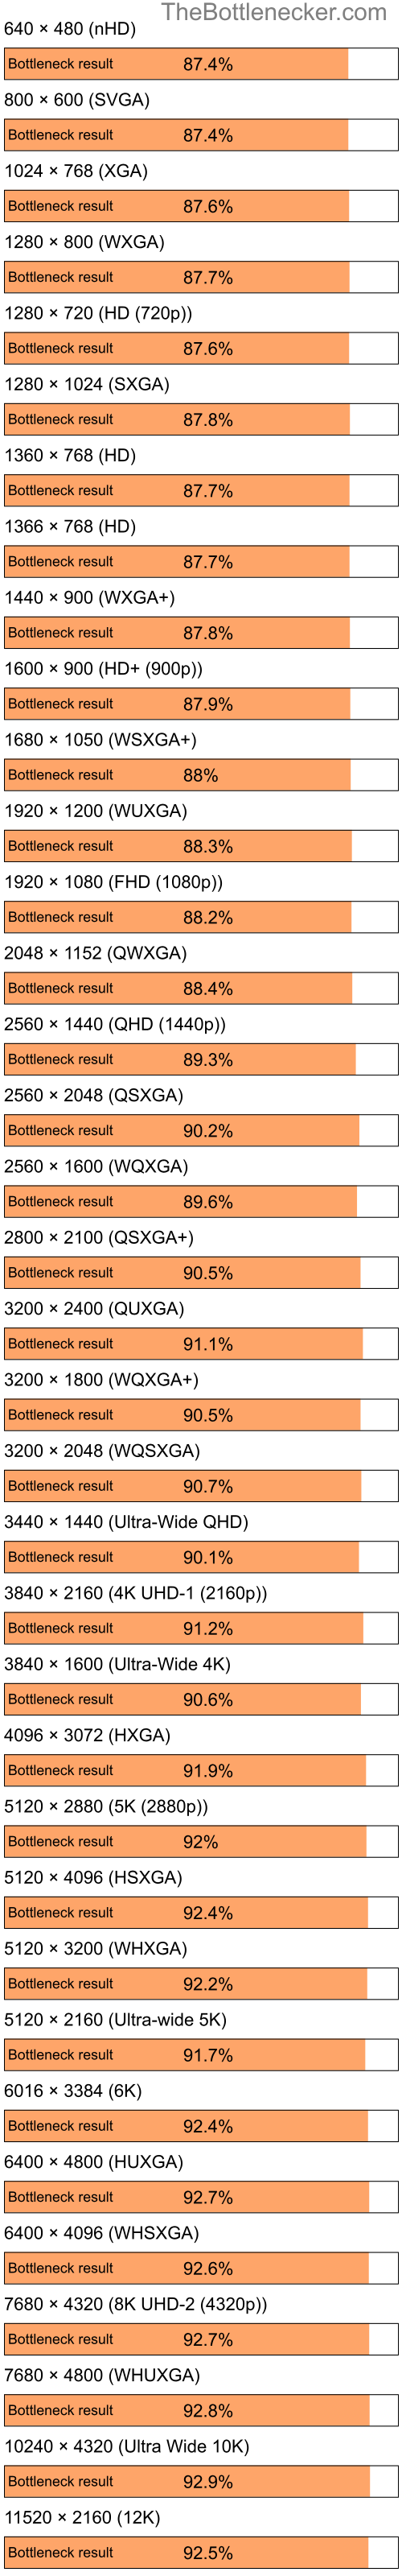 Bottleneck results by resolution for Intel Pentium 4 and AMD Mobility Radeon 9000 IGP in General Tasks